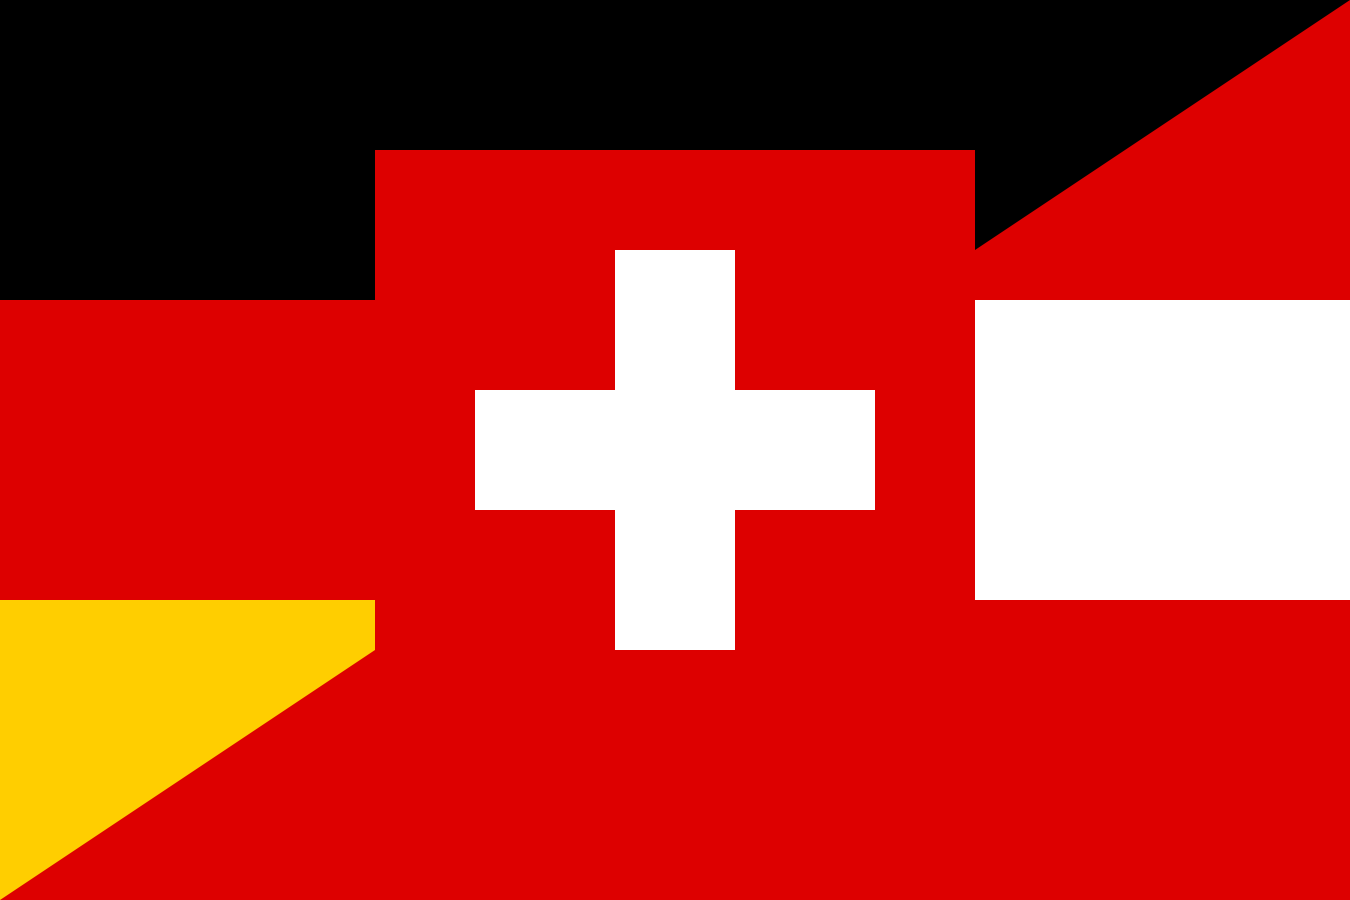 Download File:German-Language-Flag.svg - Wikimedia Commons